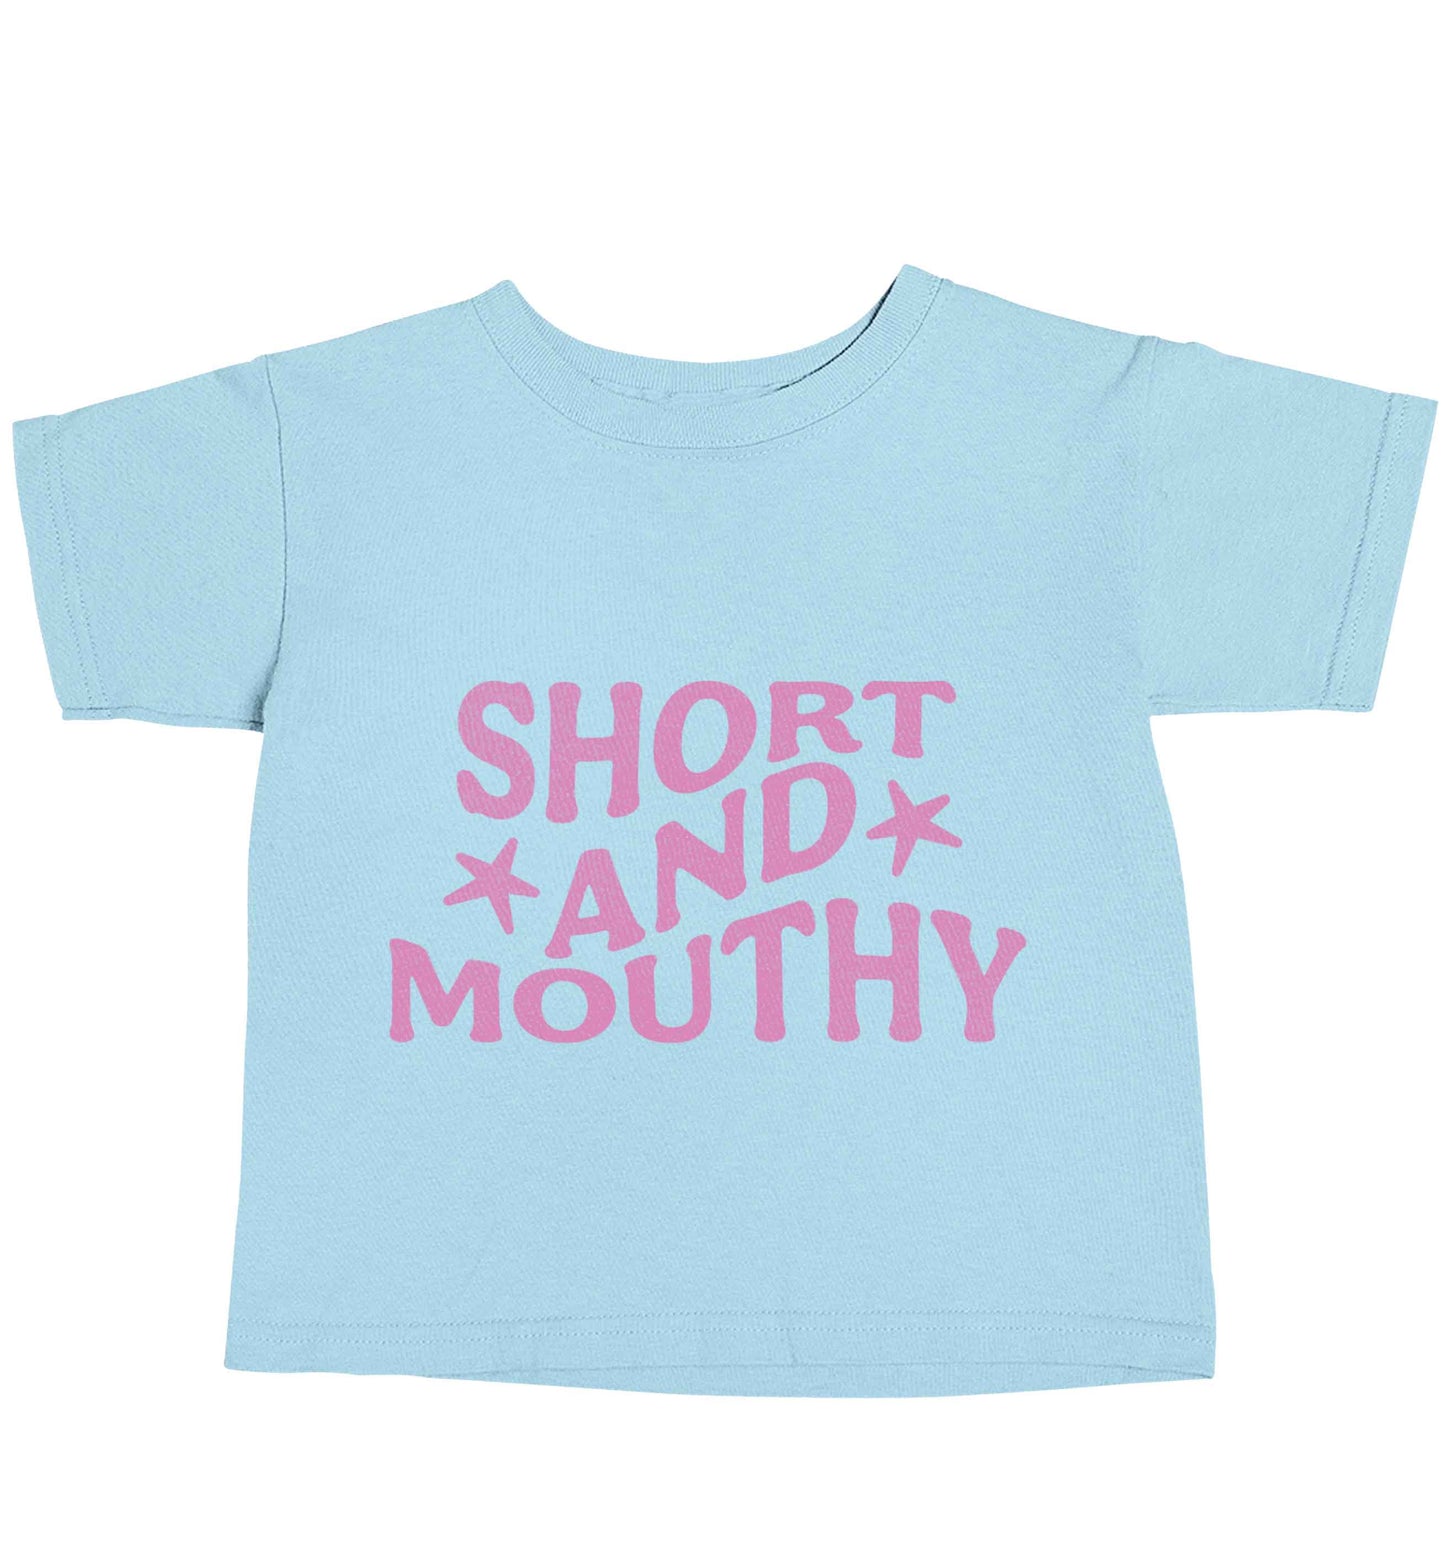 Short and mouthy light blue baby toddler Tshirt 2 Years